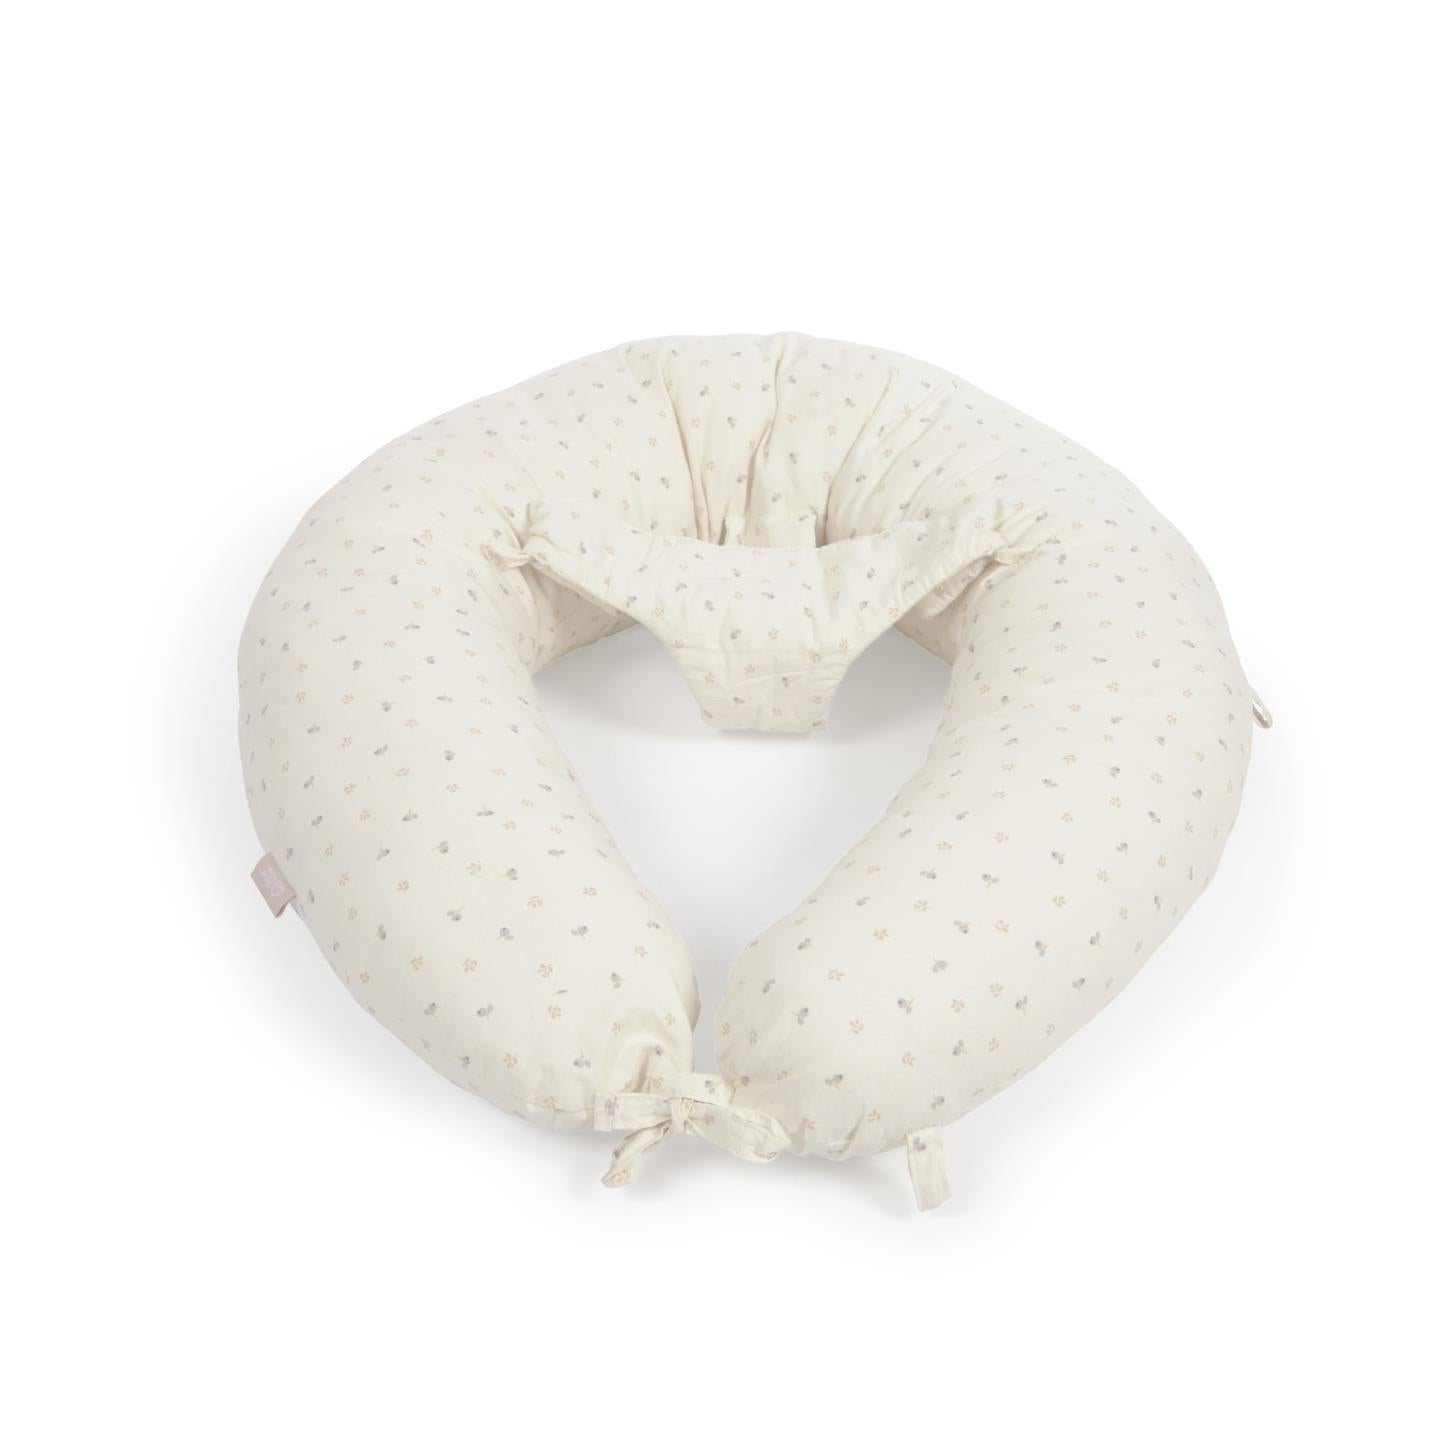 Yamile nursing pillow 100% organic cotton (GOTS) in beige with multicoloured leaves